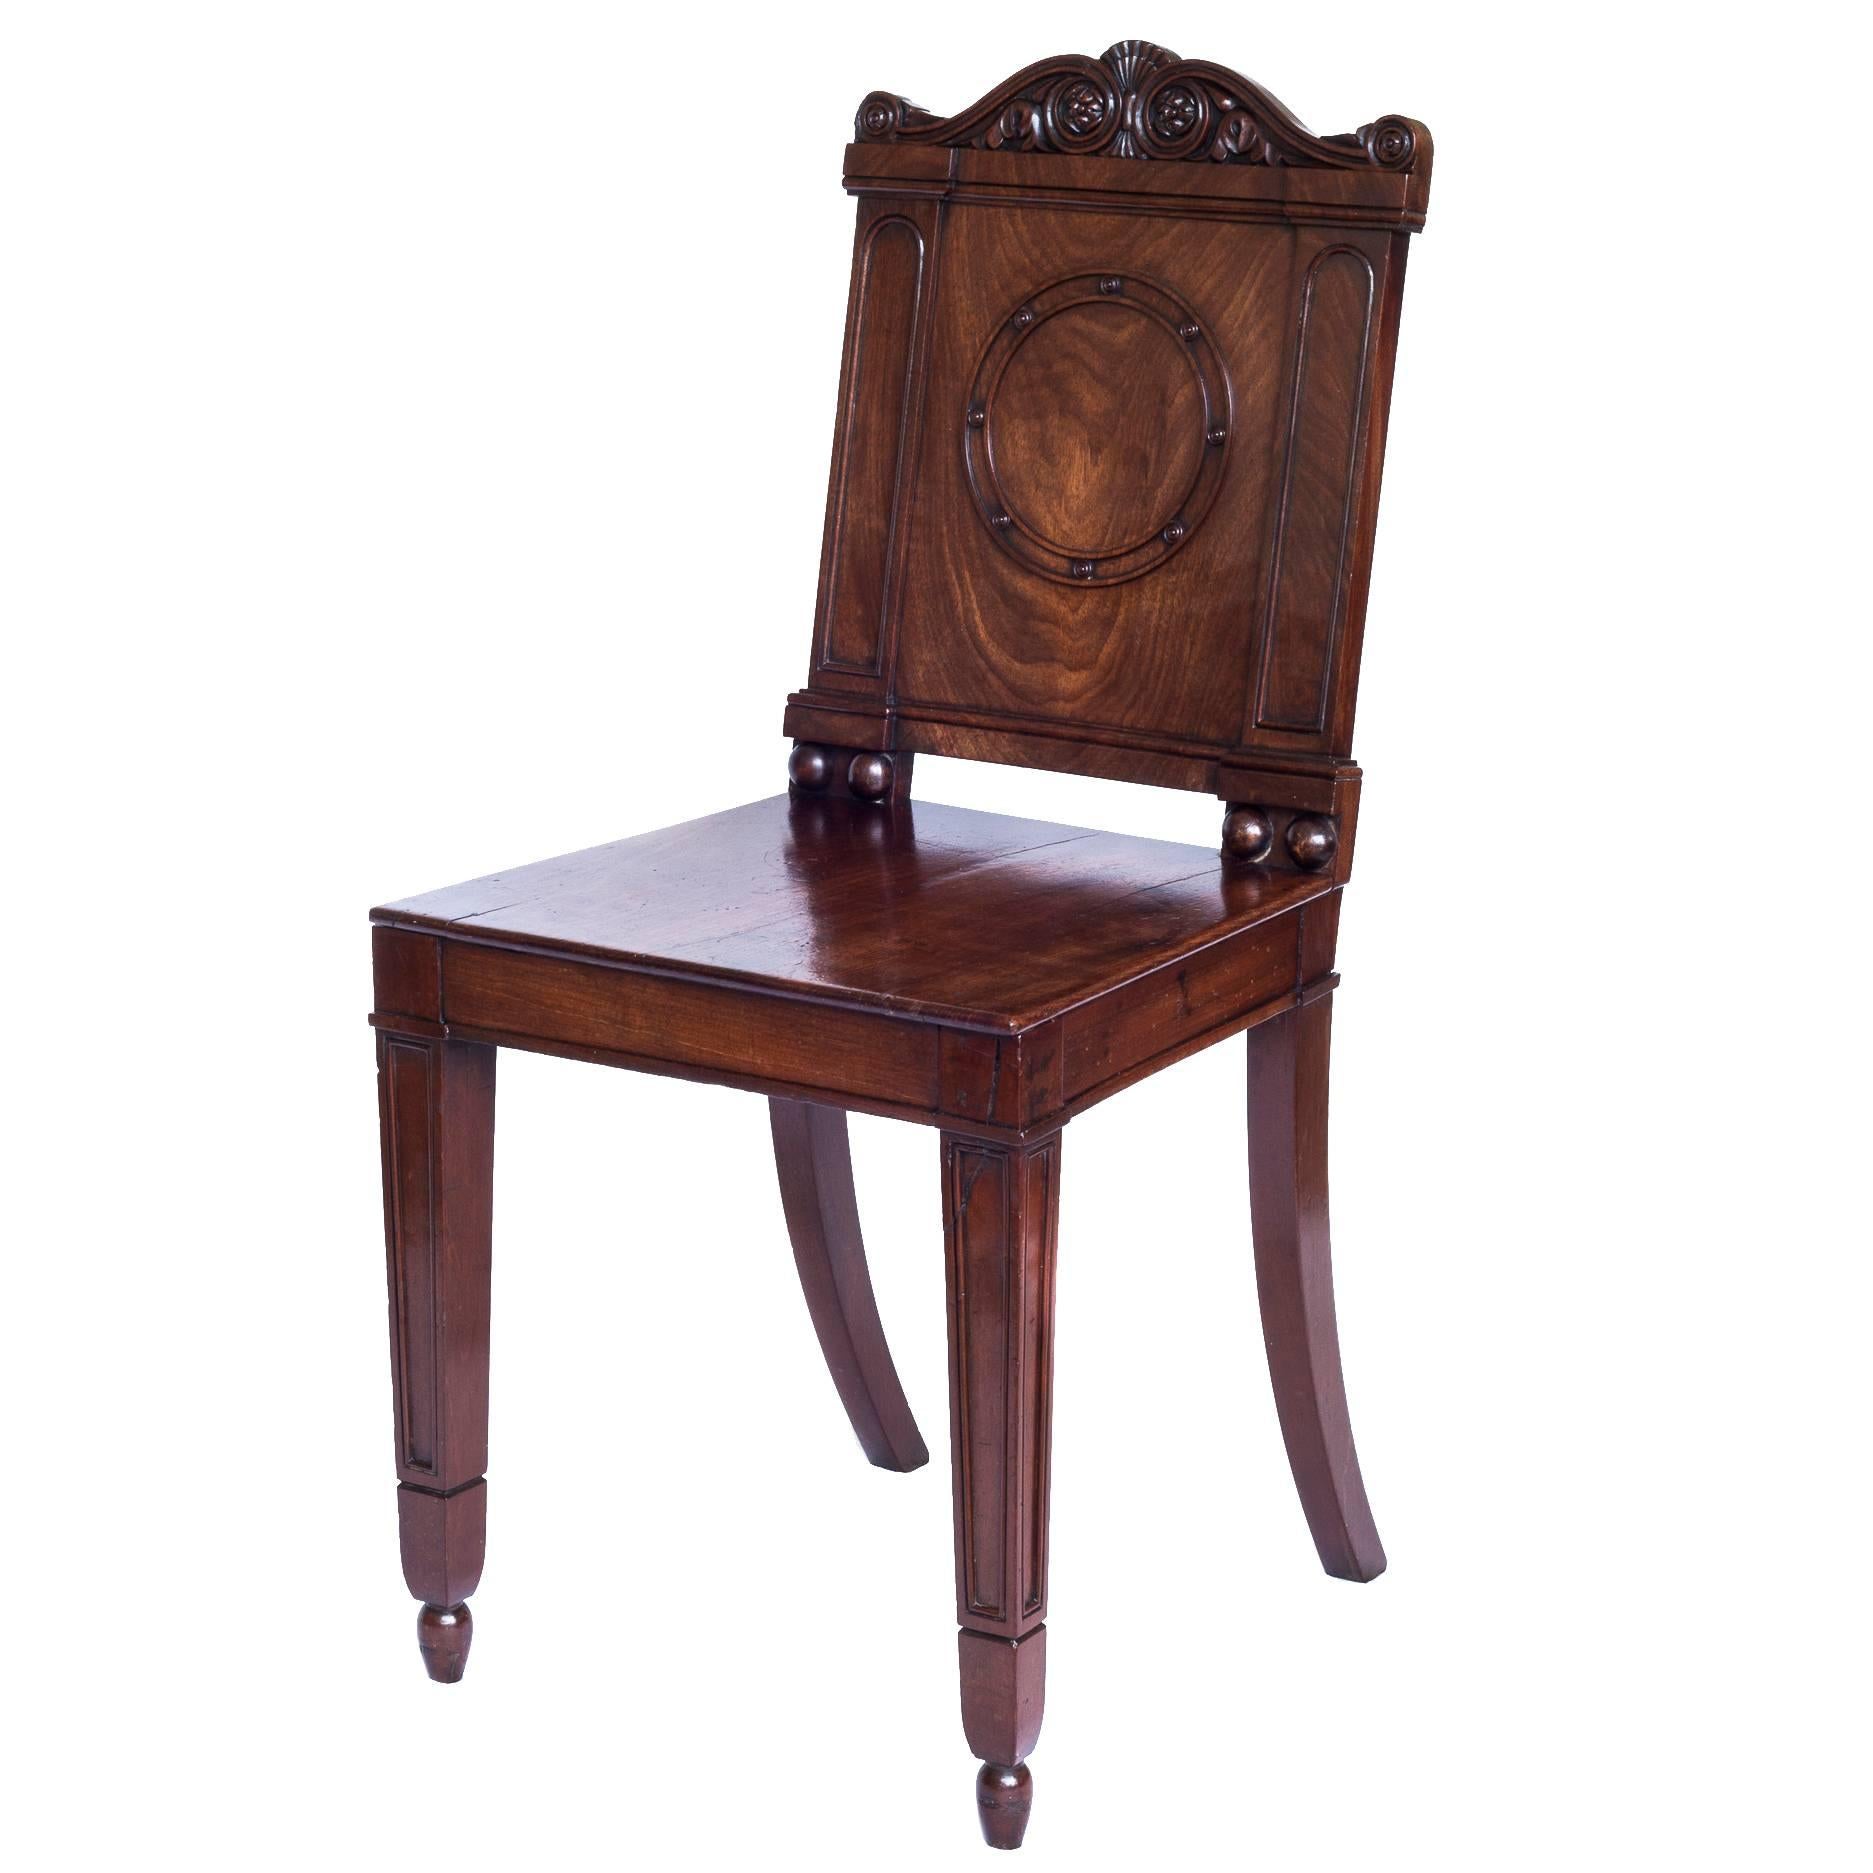 Fine 19th Century English George III Regency Hall Chair, Attributed to Gillows